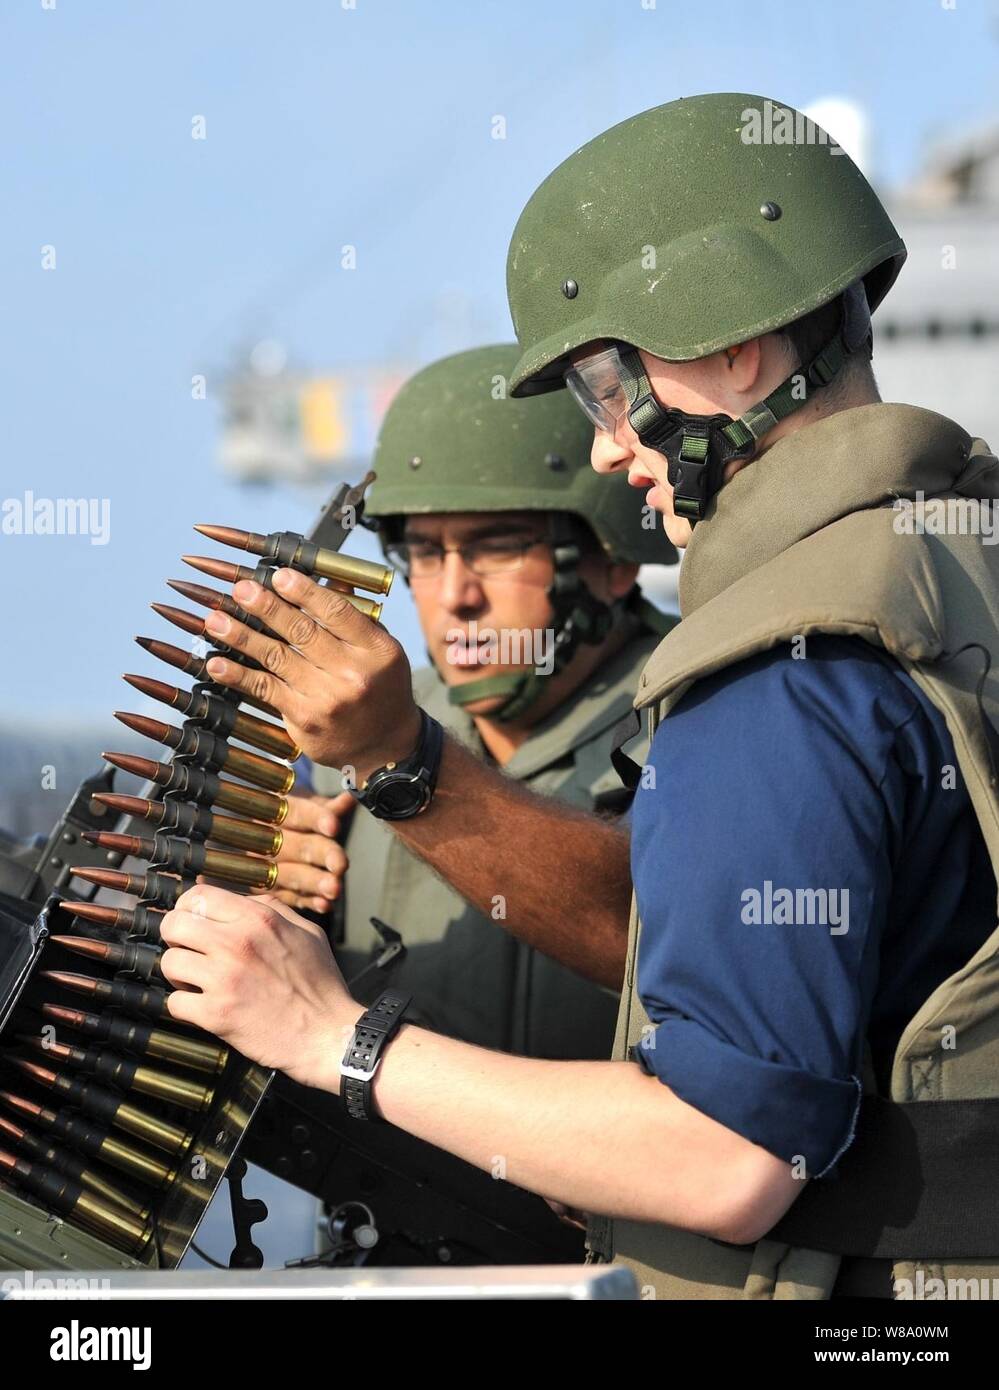 U.S. Navy Petty Officer 1st Class Eduardo Soto (left) instructs Seaman Tyler Bishop on firing a .50 caliber machine gun during a live-fire exercise aboard the U.S. 7th Fleet command ship USS Blue Ridge (LCC 19) in the South China Sea on March 28, 2012. Stock Photo